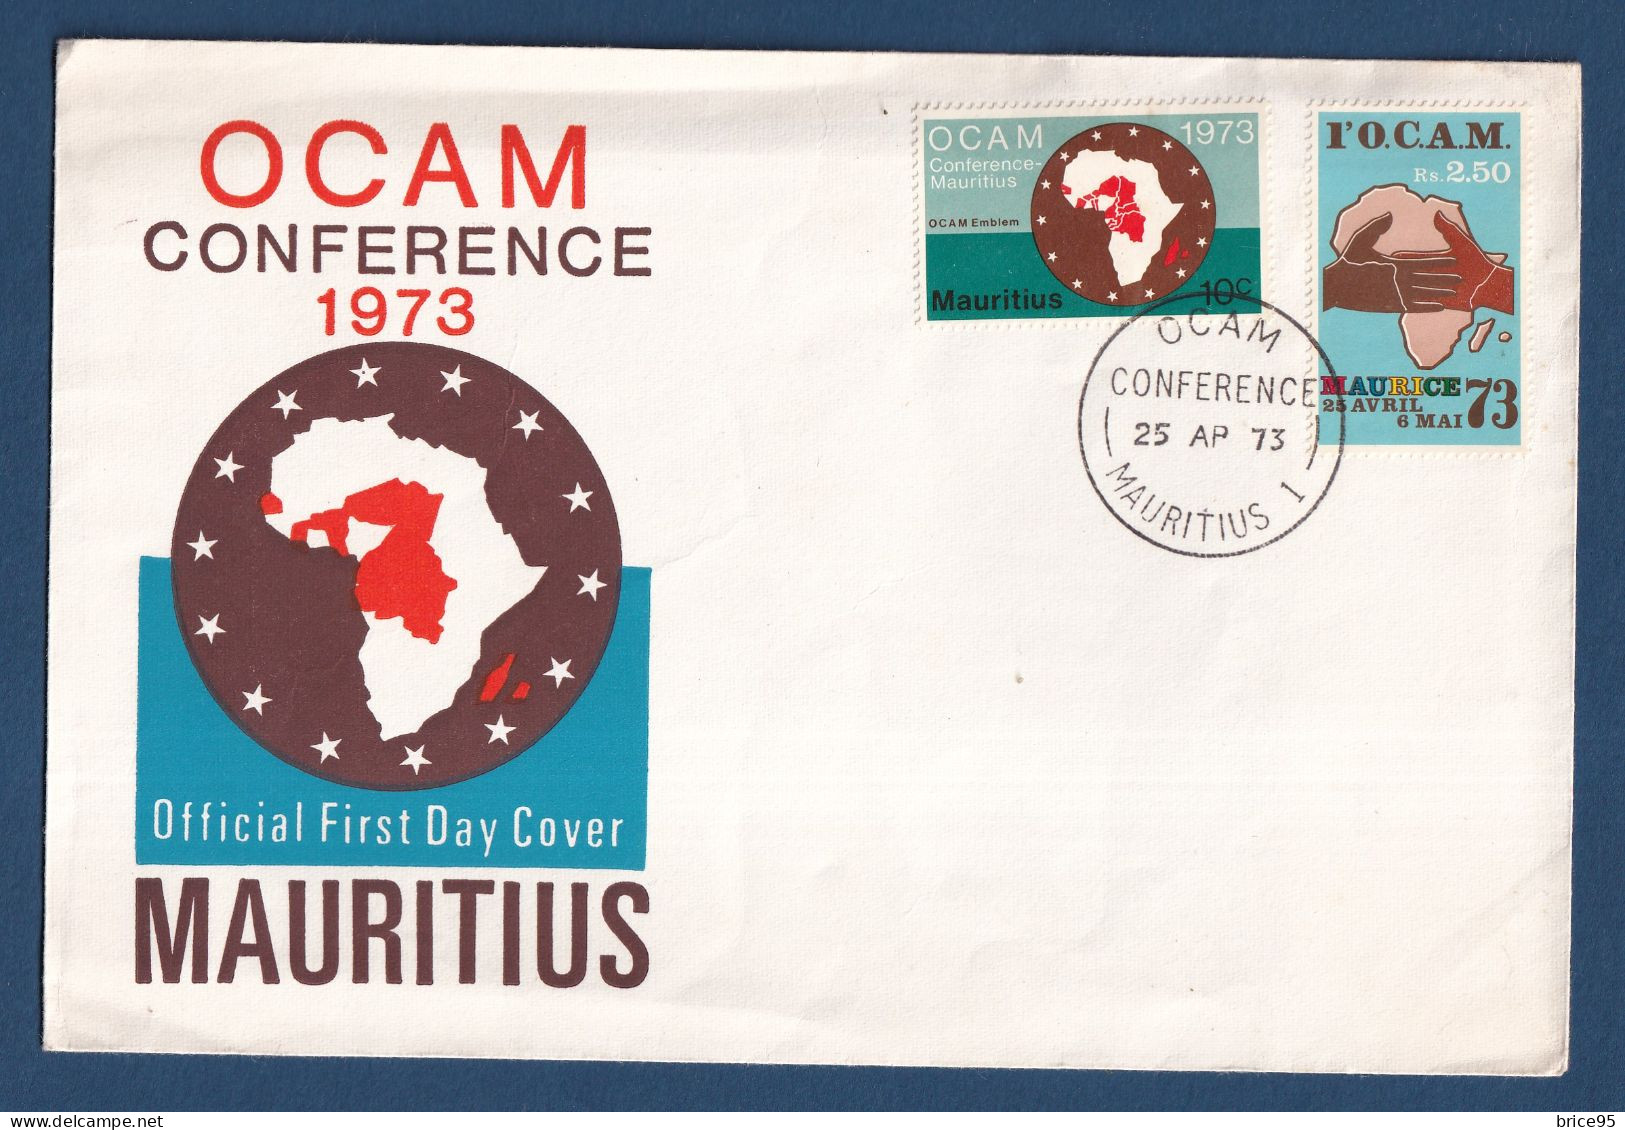 Maurice - OCAM Conference - FDC - Premier Jour - Mauritius - 1973 - Mauritius (1968-...)